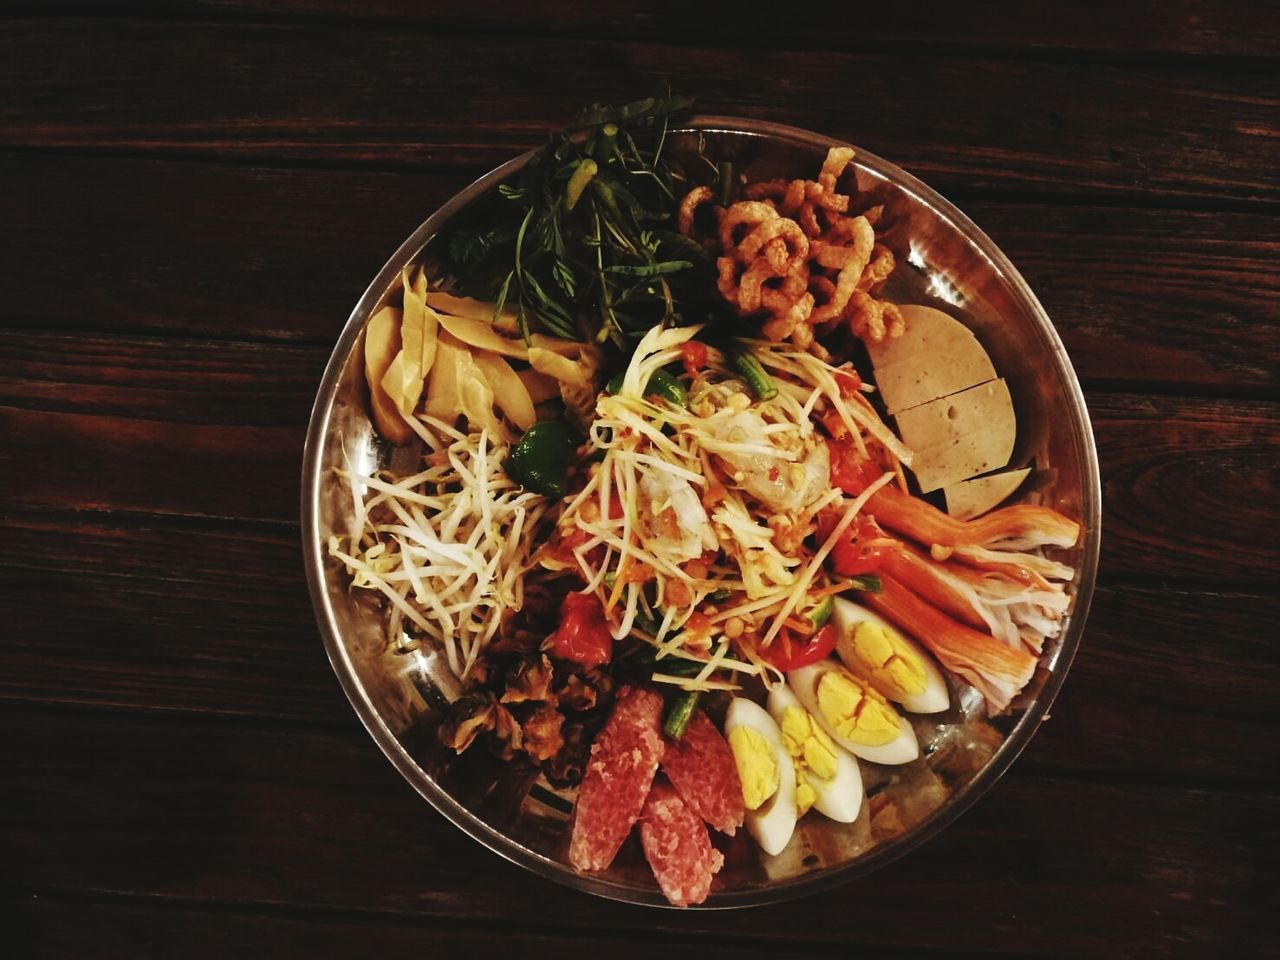 CLOSE-UP OF FOOD IN BOWL ON TABLE